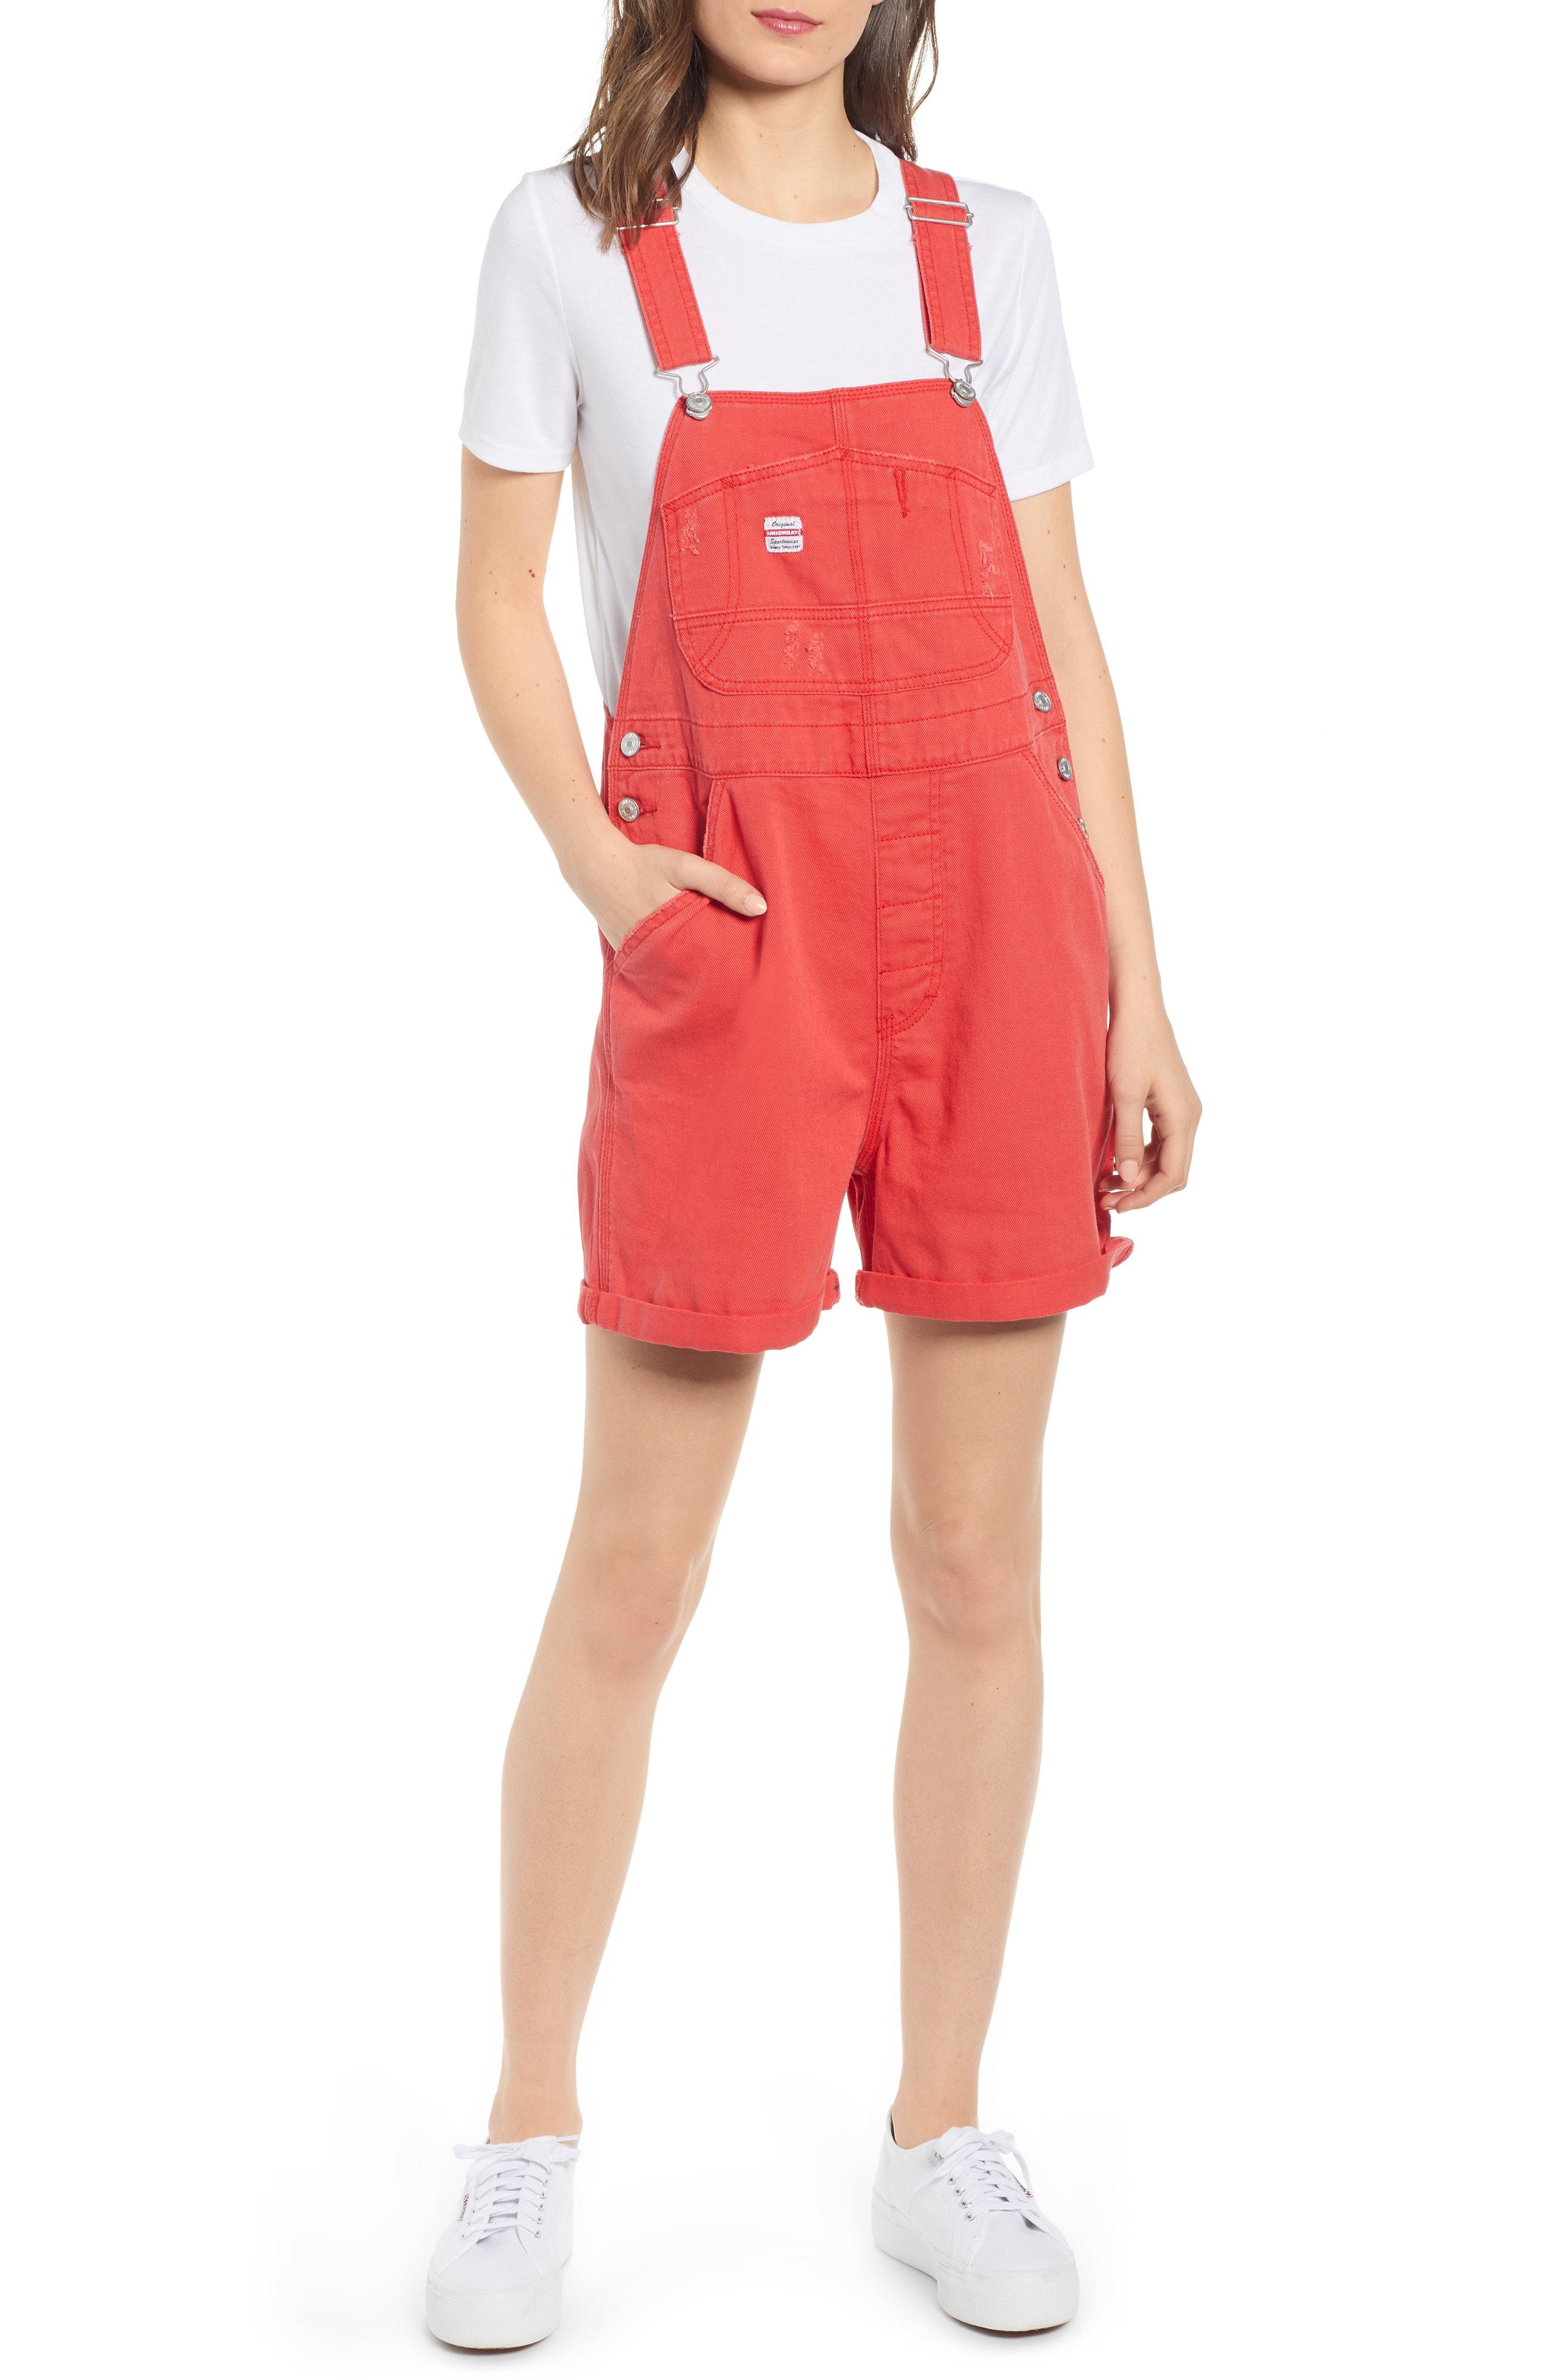 unionbay overall shorts